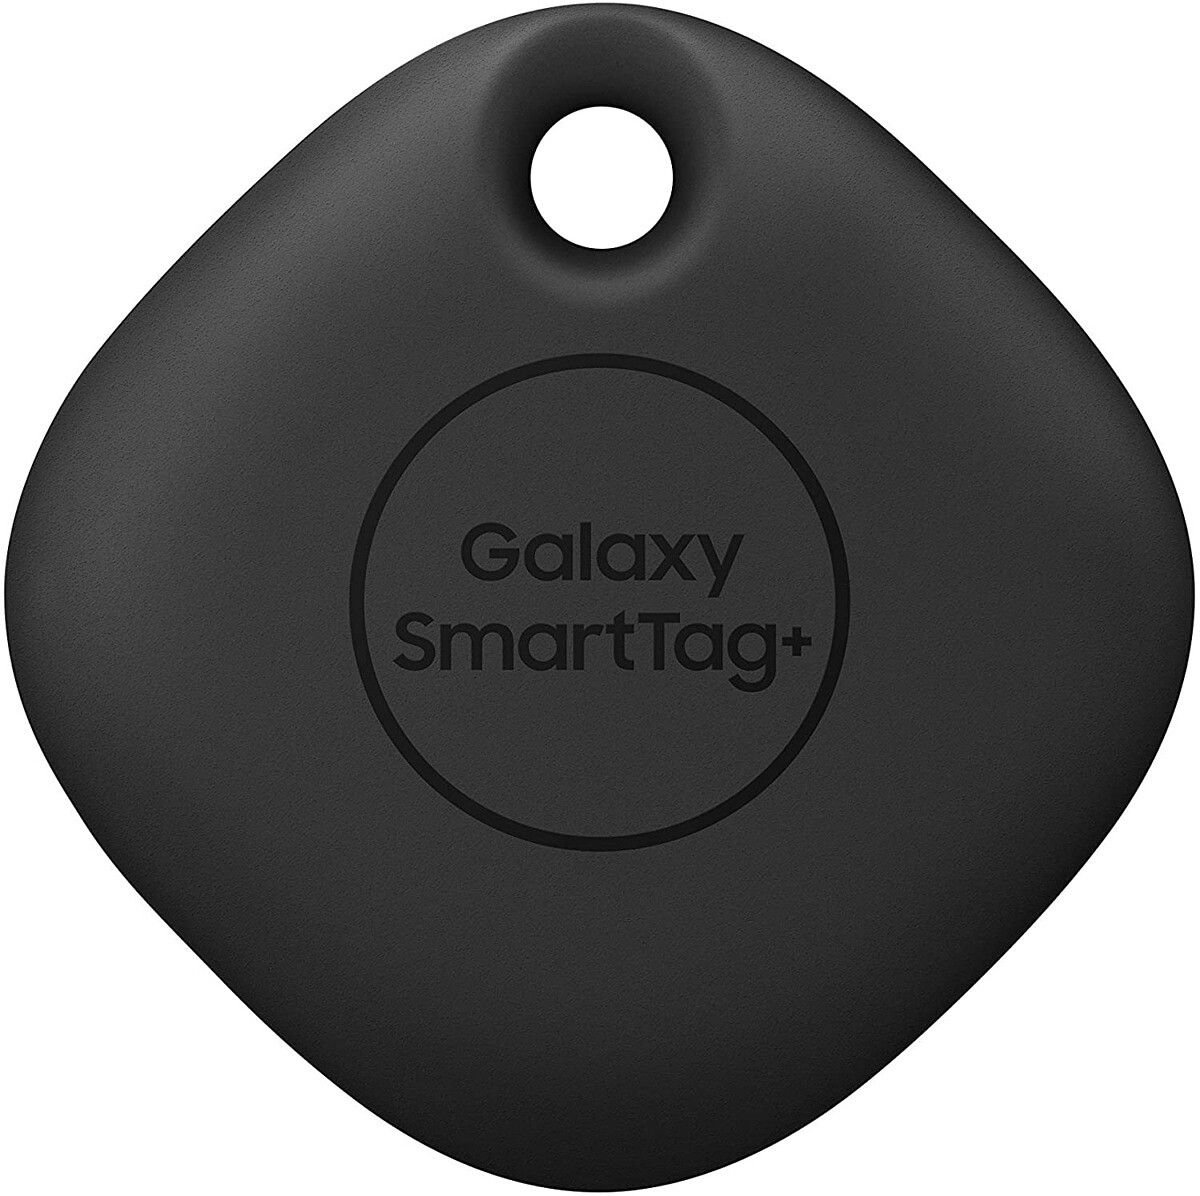 Track down your lost wallet, keys, or backpack by picking up a SmartTag+ from Amazon.